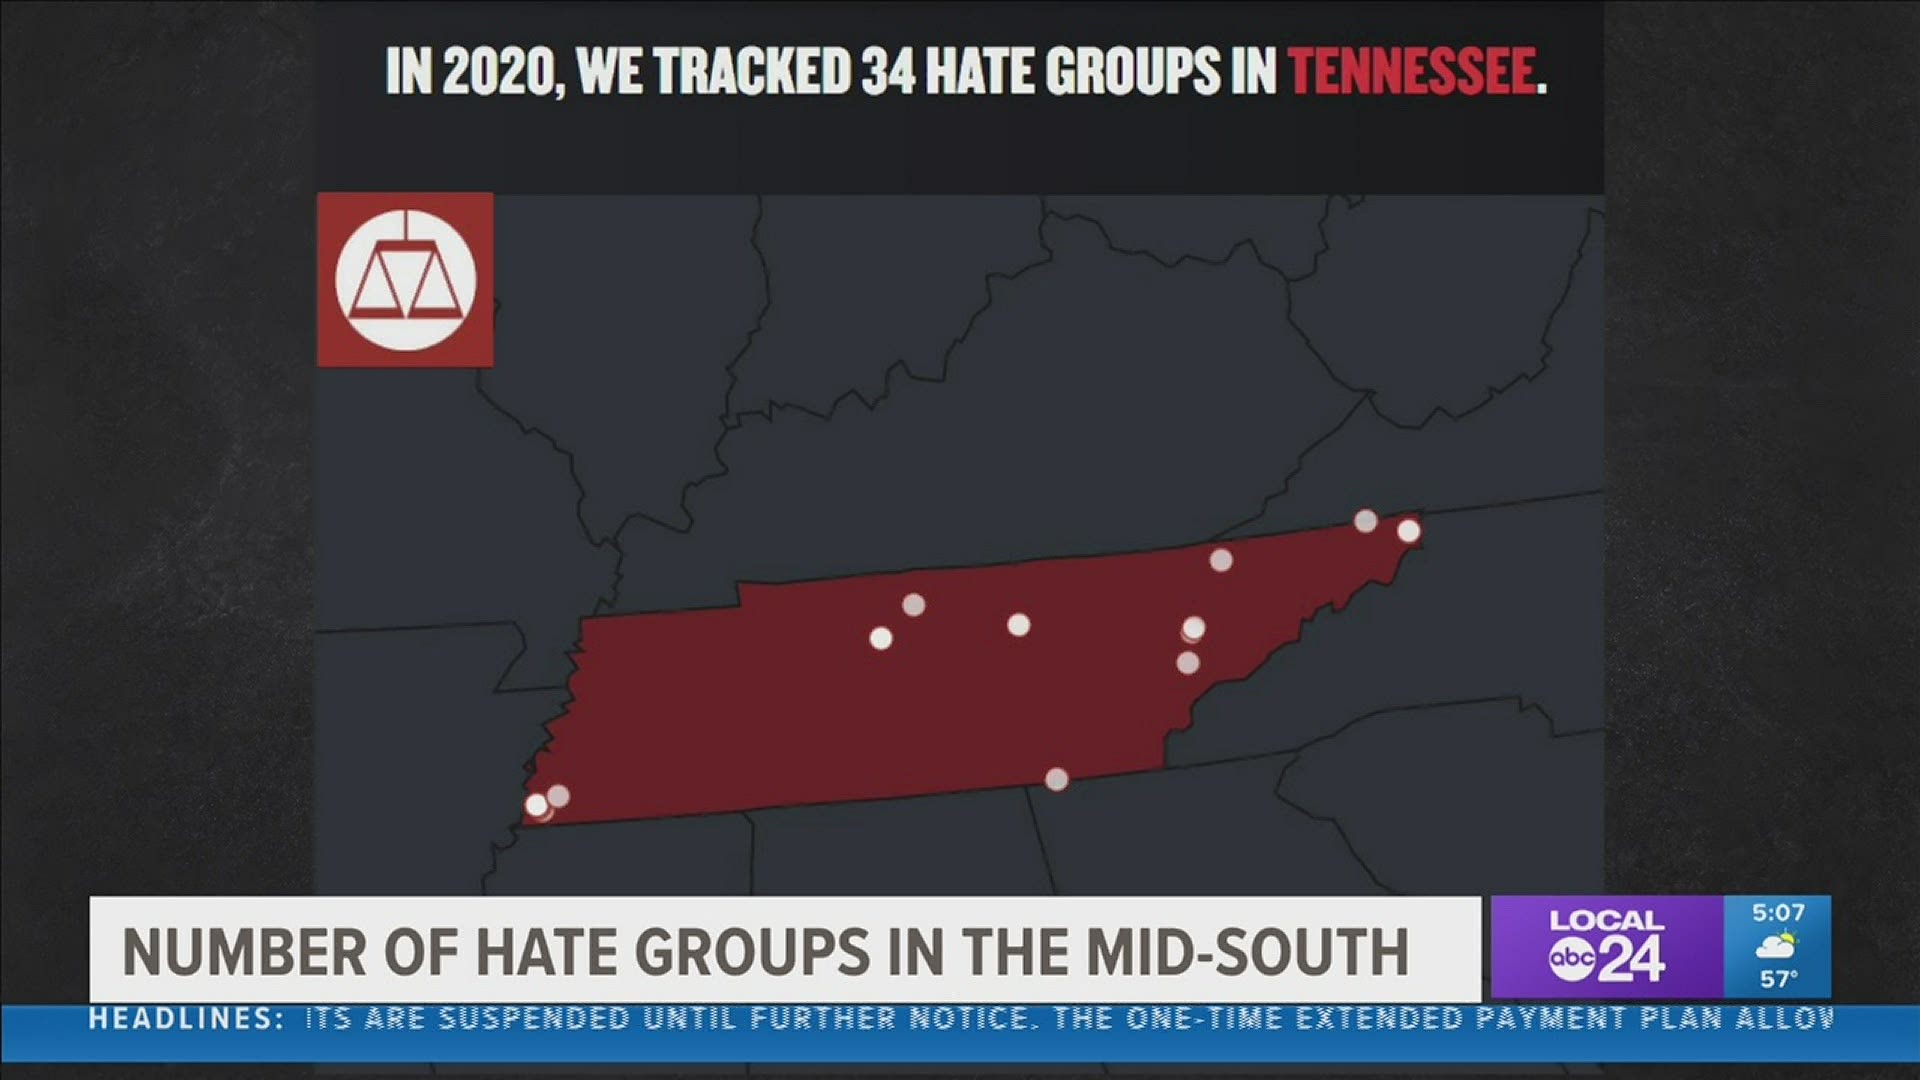 Overall, the SPLC said there are total of 57 hate groups in the Mid-South.